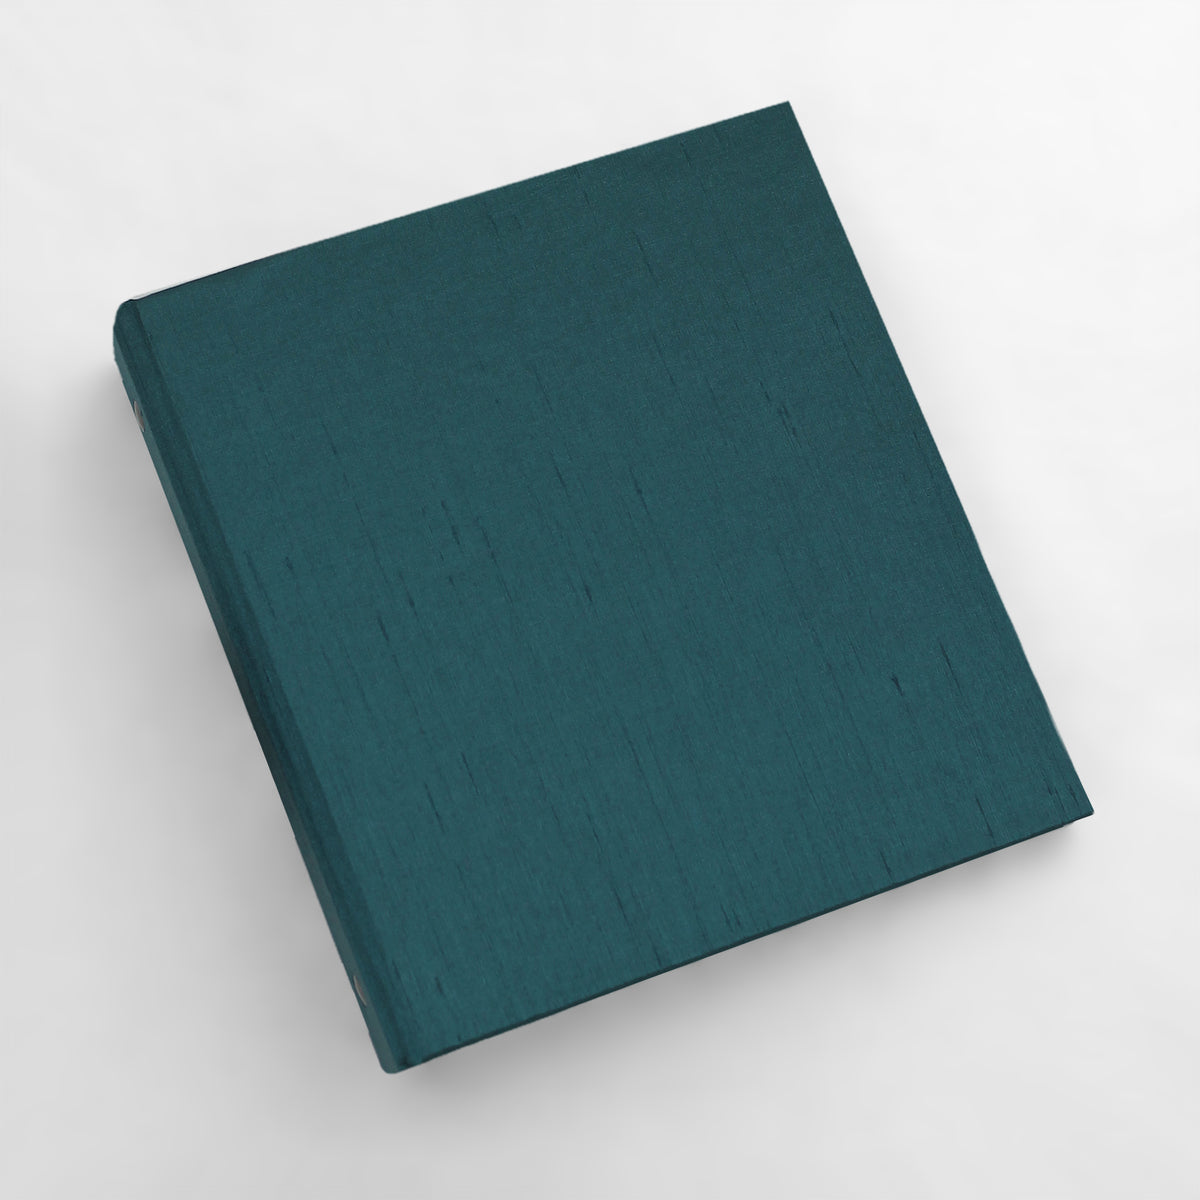 Medium Photo Binder For 4x6 Photos | Cover: Teal Blue Silk | Available Personalized